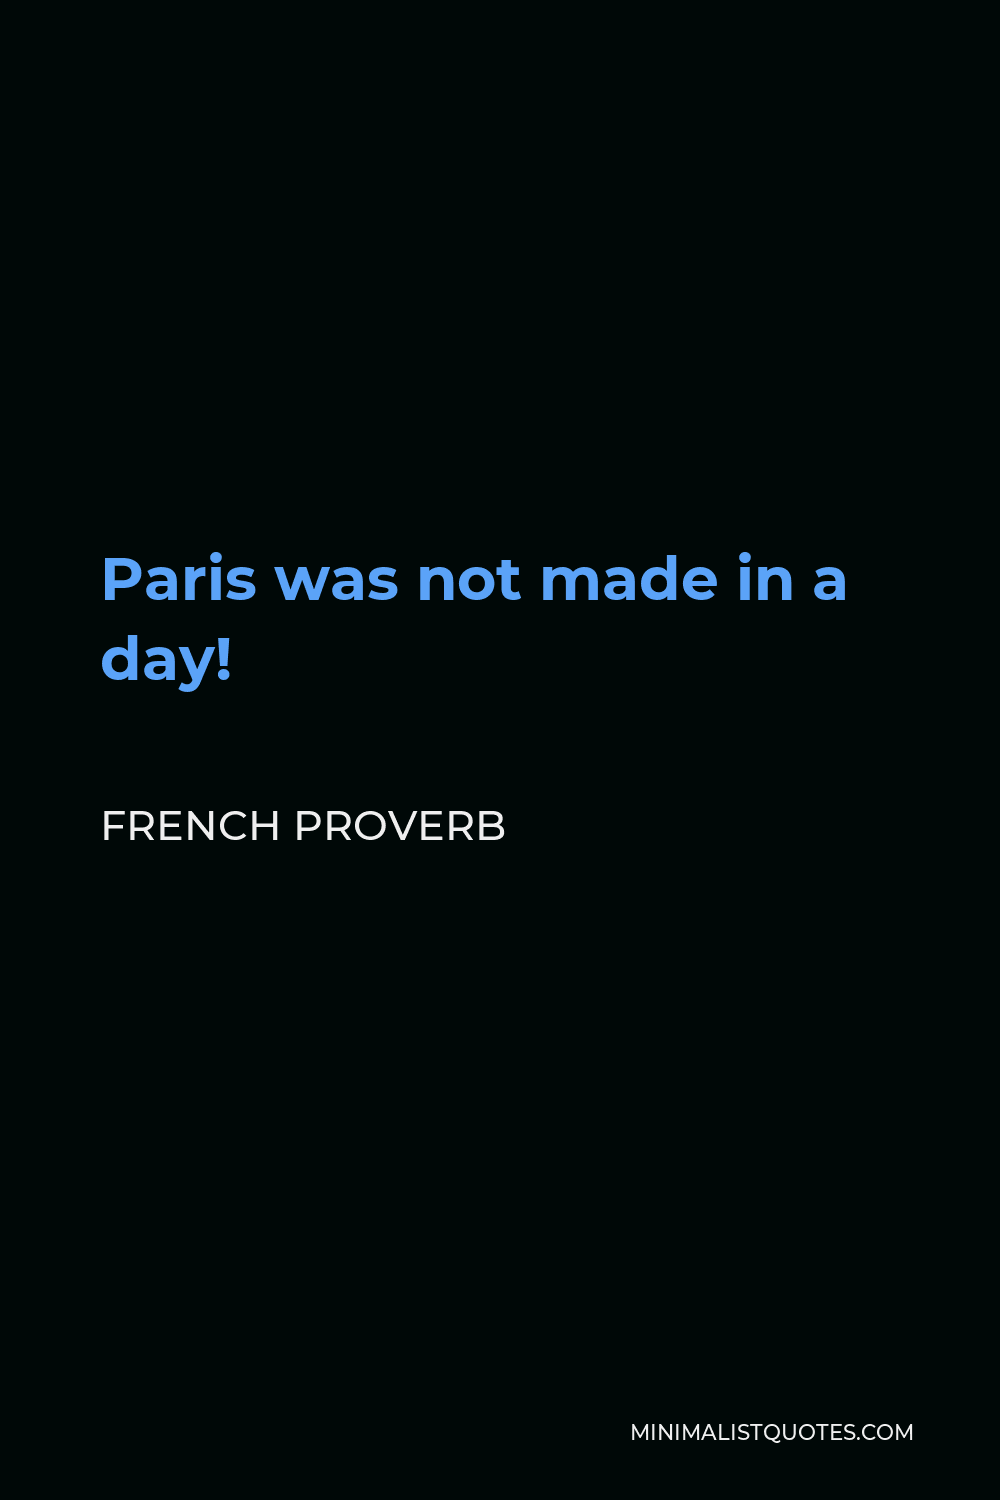 French Proverb Quote - Paris was not made in a day!